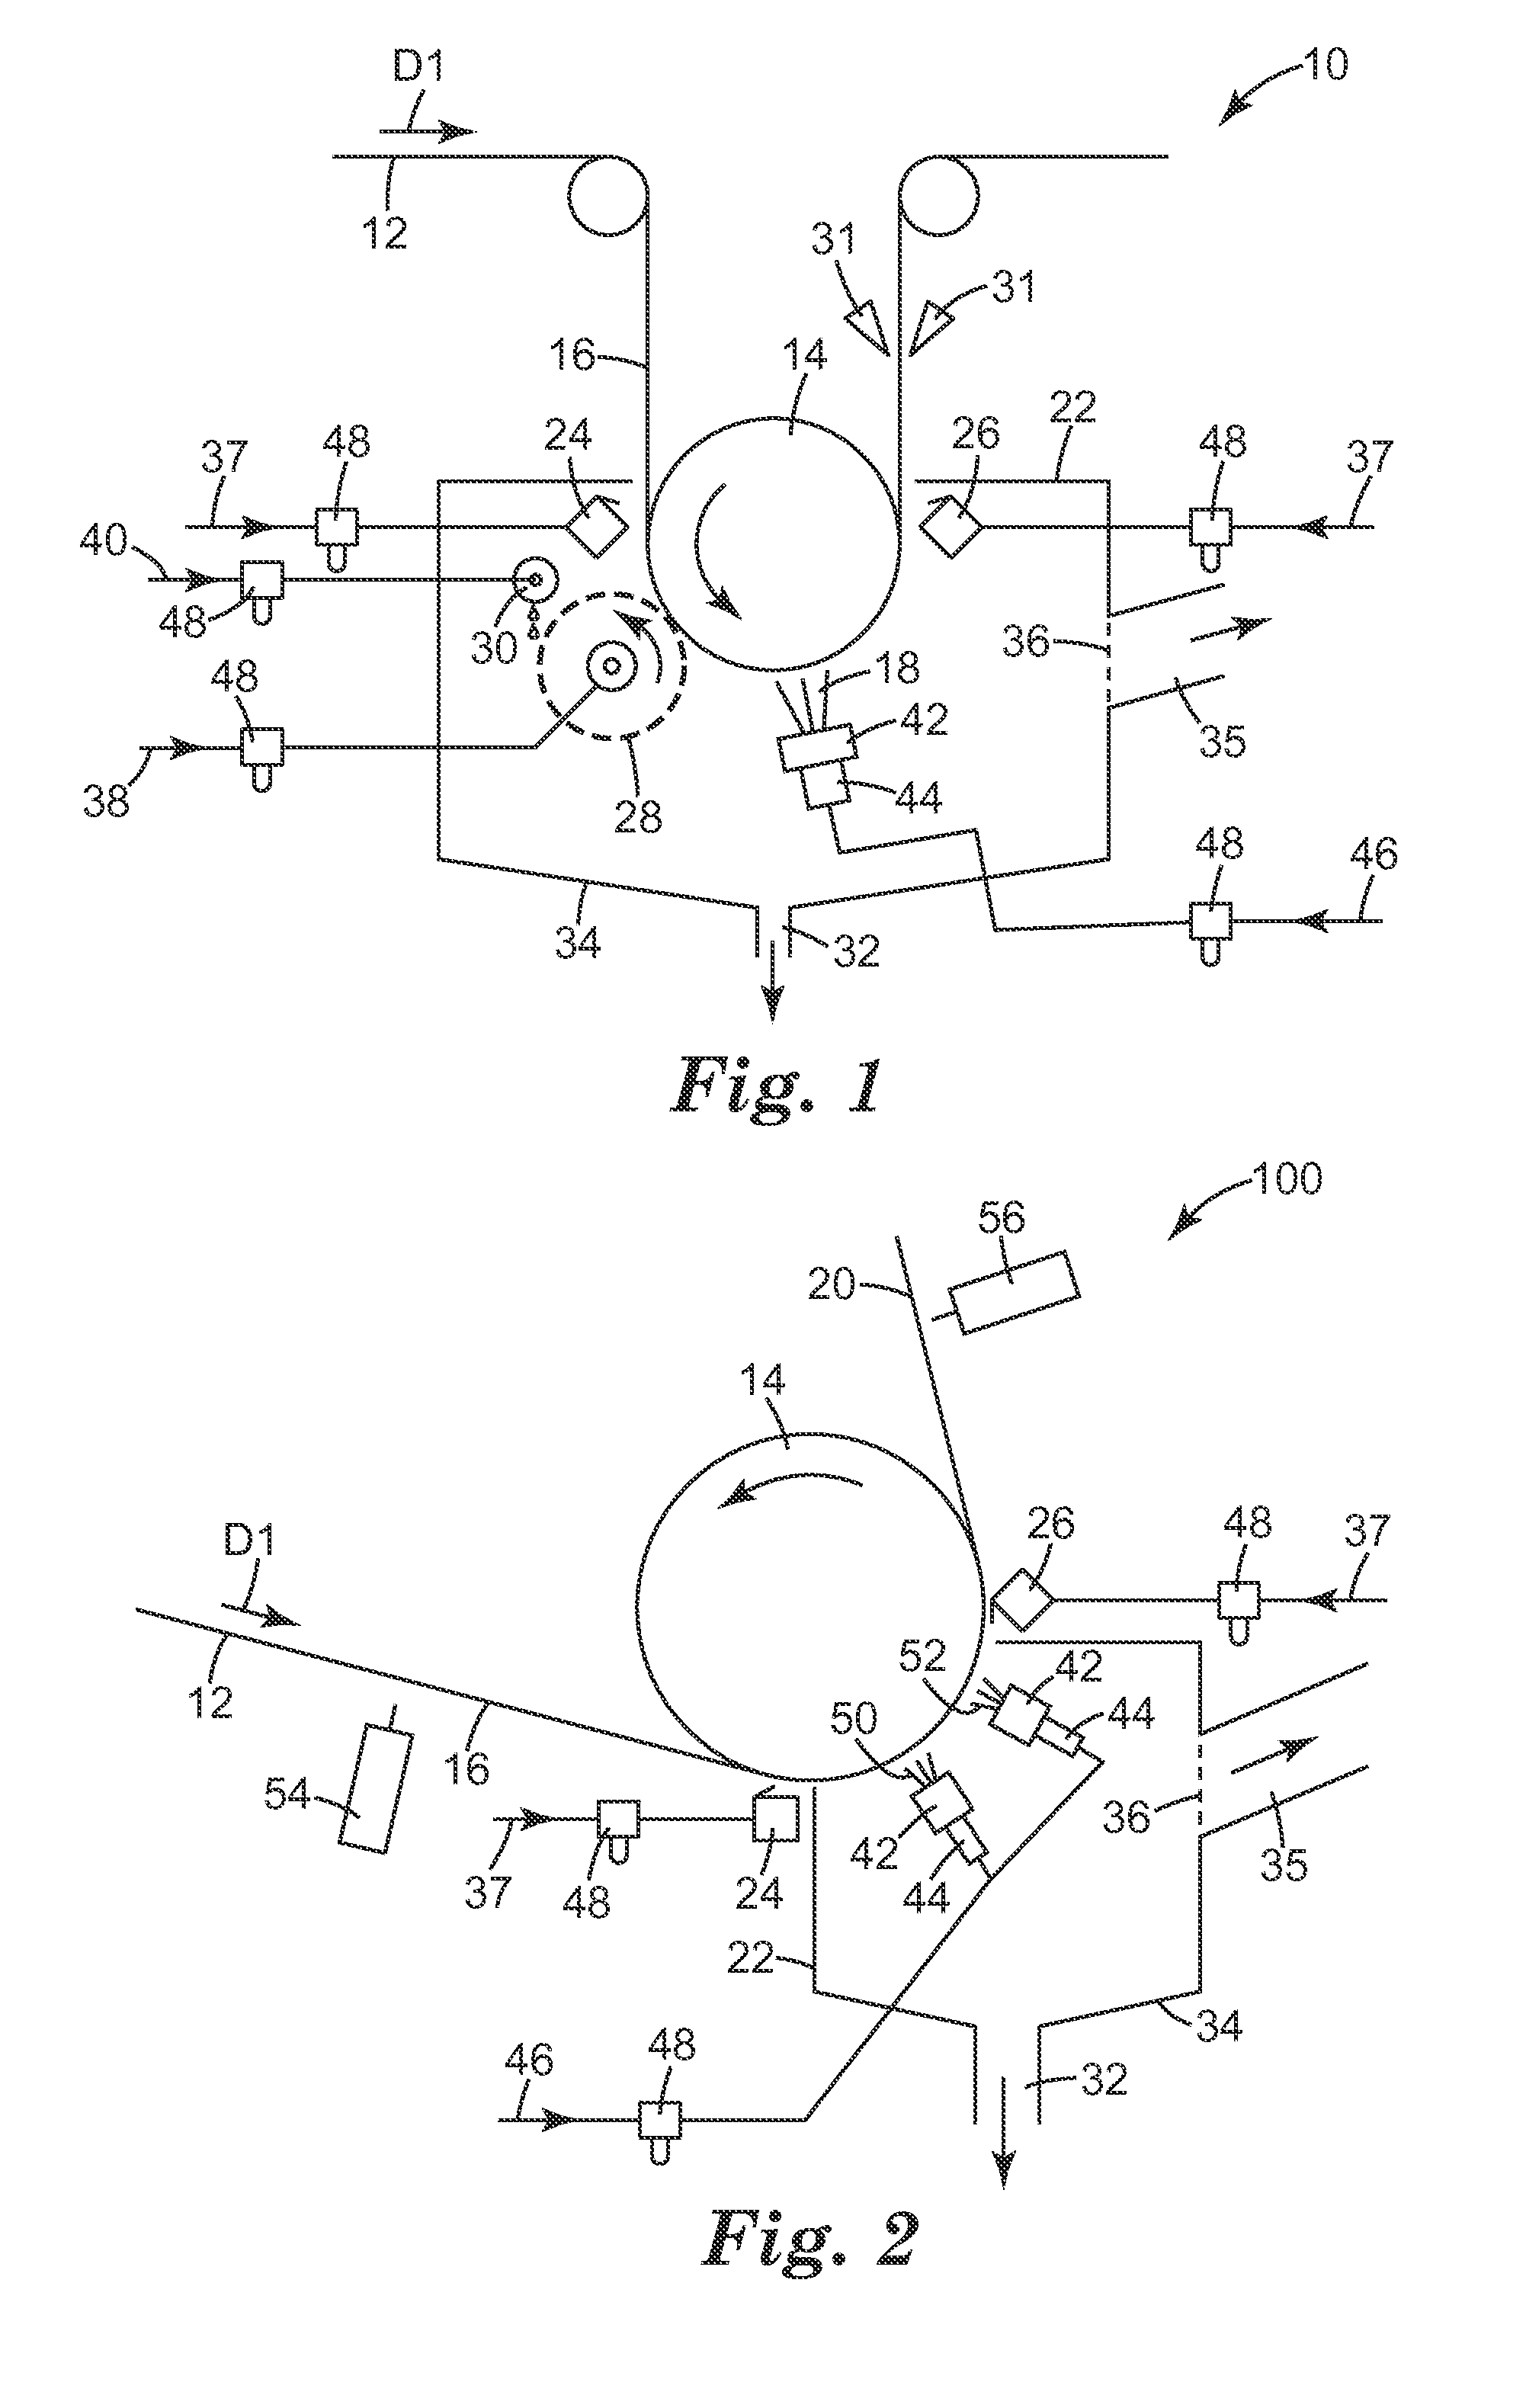 Apparatus and Method for Cleaning Flexible Webs